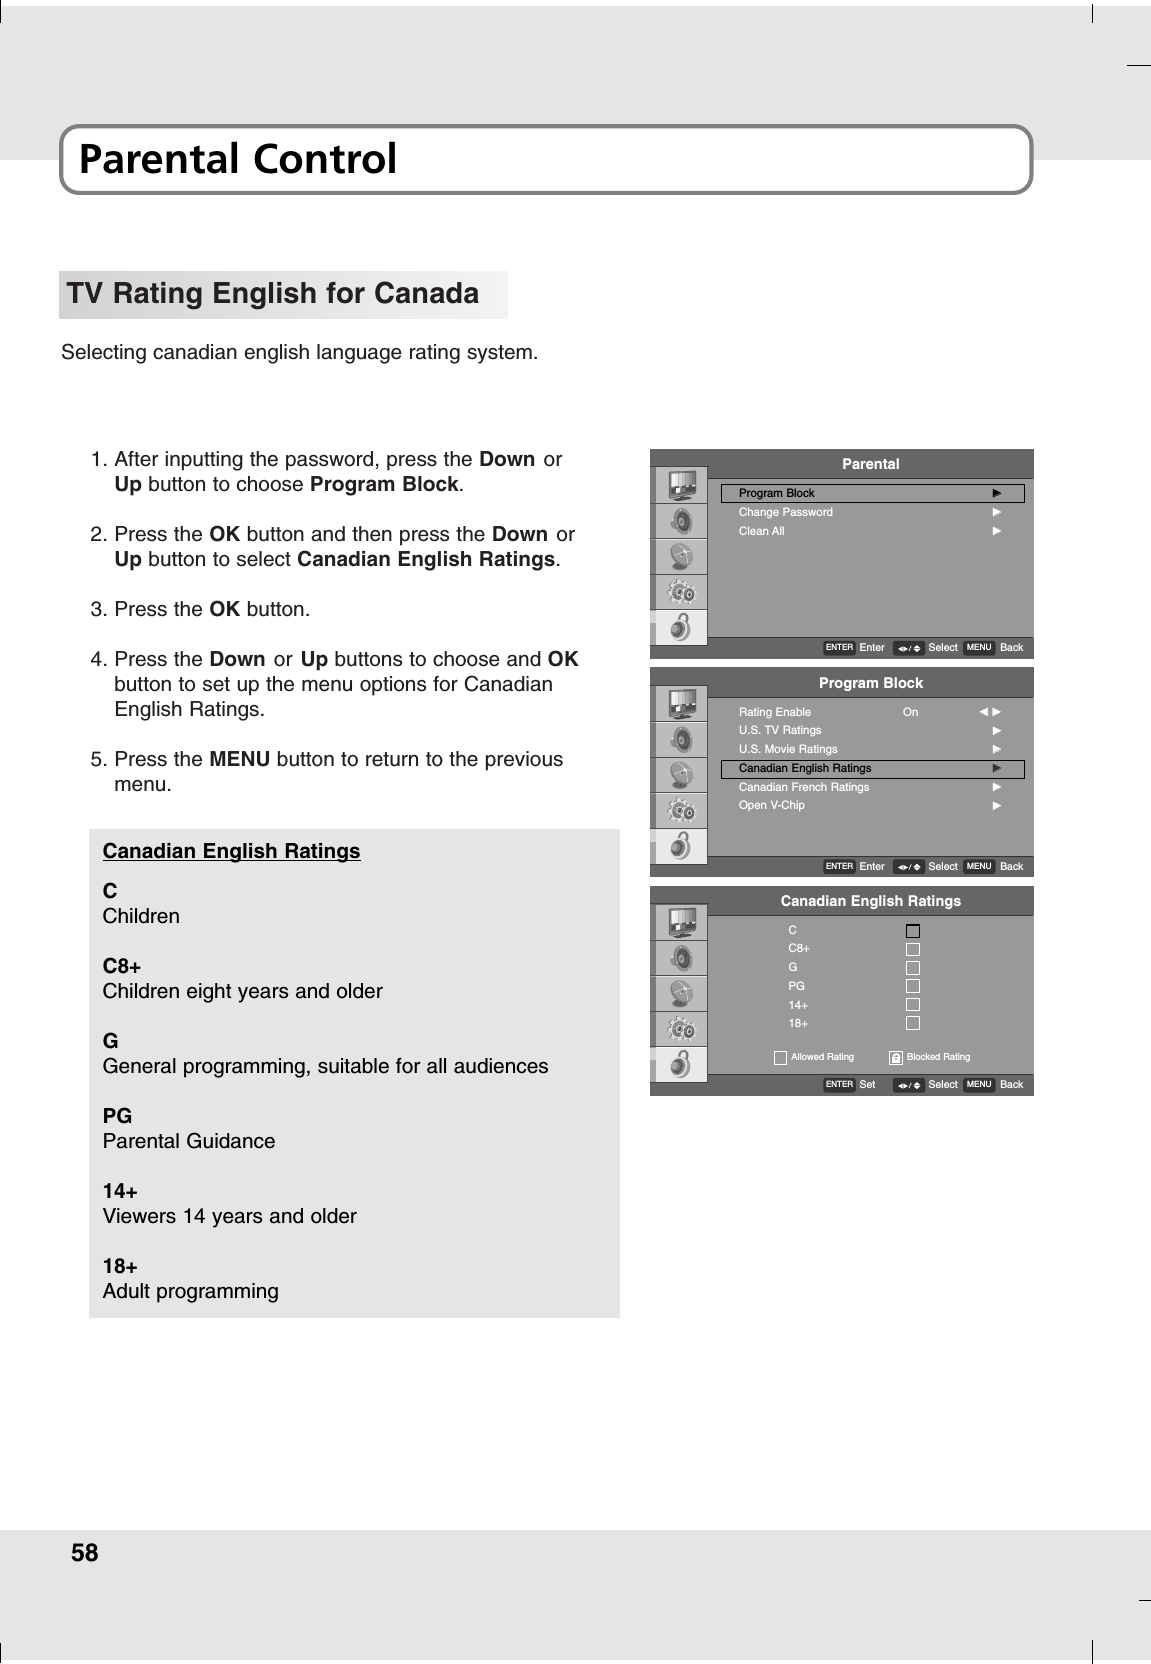 58Parental ControlTV Rating English for CanadaSelecting canadian english language rating system.1. After inputting the password, press the Down orUp button to choose Program Block.2. Press the OK button and then press the Down orUp button to select Canadian English Ratings.3. Press the OK button.4. Press the Down or Up buttons to choose and OKbutton to set up the menu options for CanadianEnglish Ratings.5. Press the MENU button to return to the previousmenu.CChildrenC8+Children eight years and olderGGeneral programming, suitable for all audiencesPGParental Guidance 14+Viewers 14 years and older18+Adult programmingCanadian English RatingsParentalProgram BlockChange PasswordClean AllGGGGGGENTEREnter MENU BackSelectProgram BlockRating EnableU.S. TV RatingsU.S. Movie RatingsCanadian English RatingsCanadian French RatingsOpen V-ChipOn FF  GGGGGGGGGGGGENTEREnter MENU BackSelectCanadian English RatingsENTERSet MENU BackSelectCC8+GPG14+18+Allowed Rating Blocked Rating